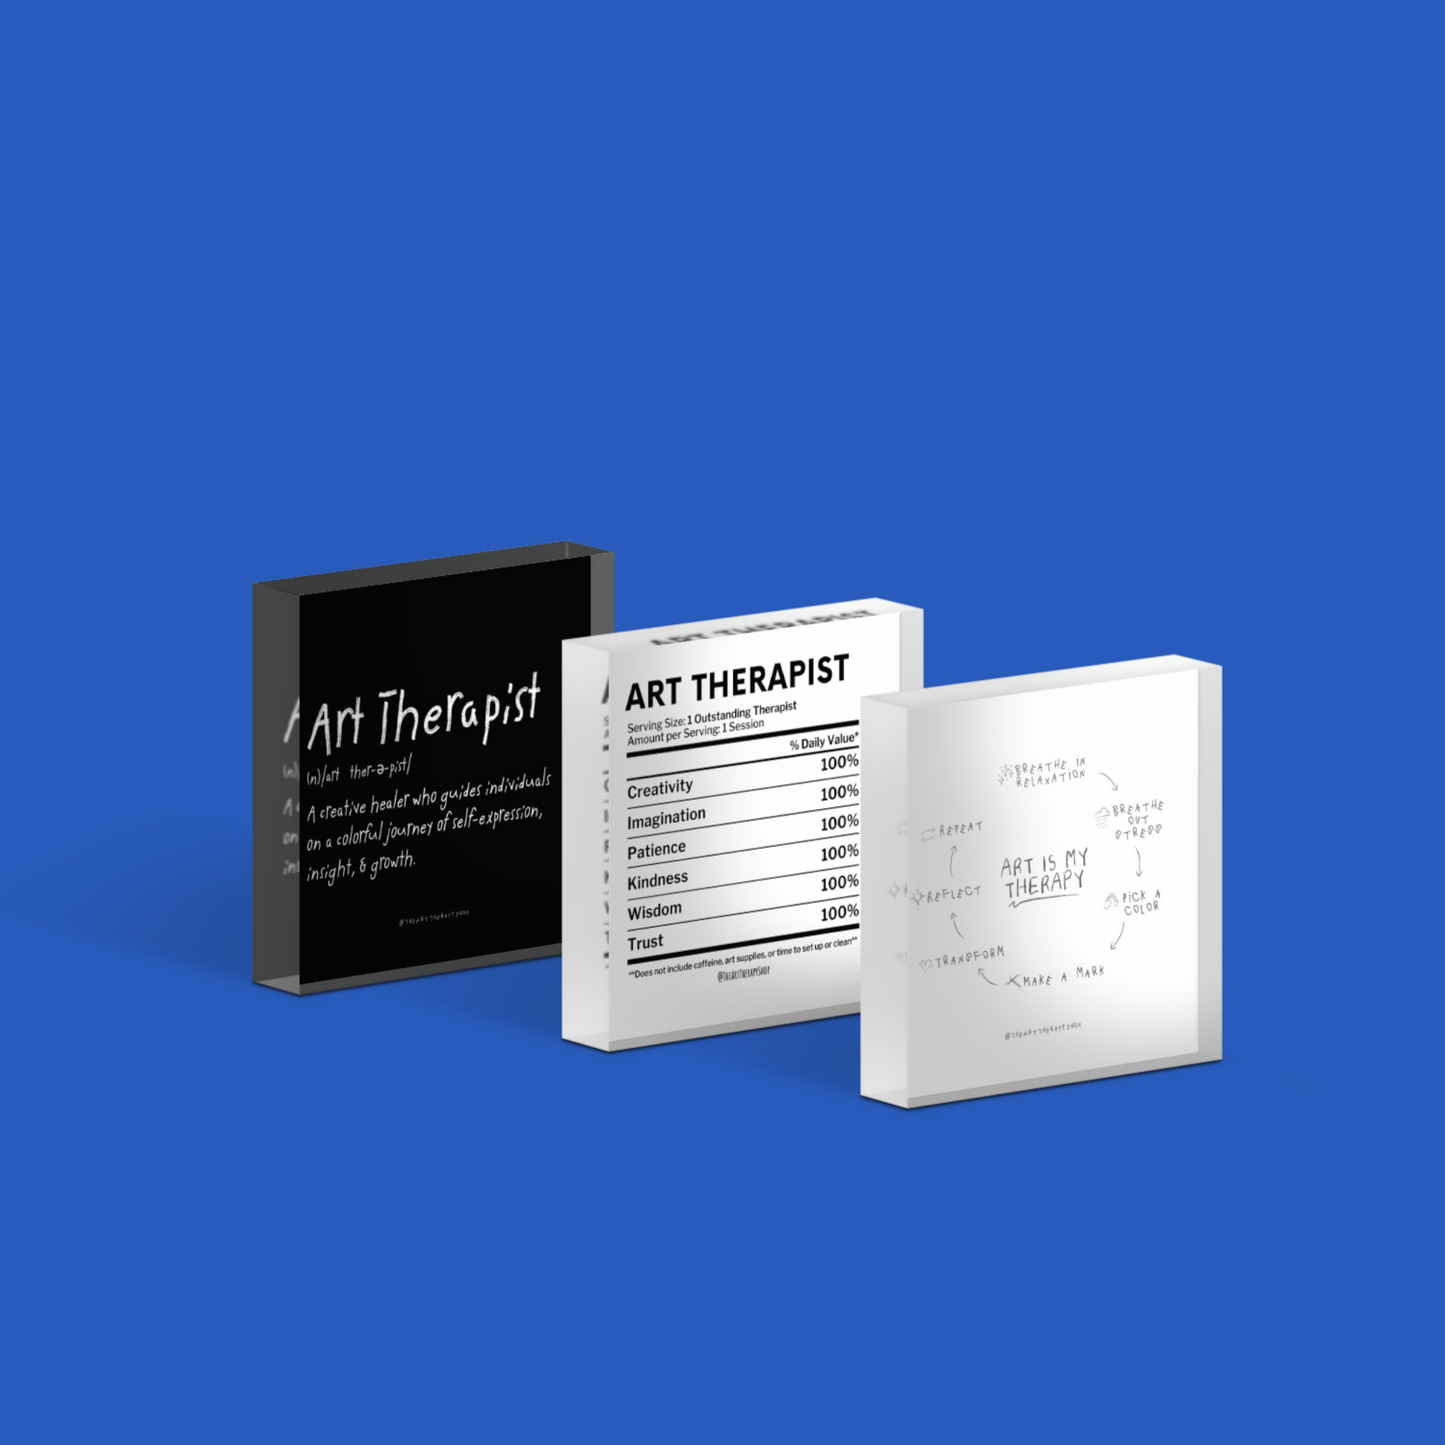 Art is My Therapy, Art Therapist Nutrition Facts, & Art Therapist Defined Acrylic Blocks